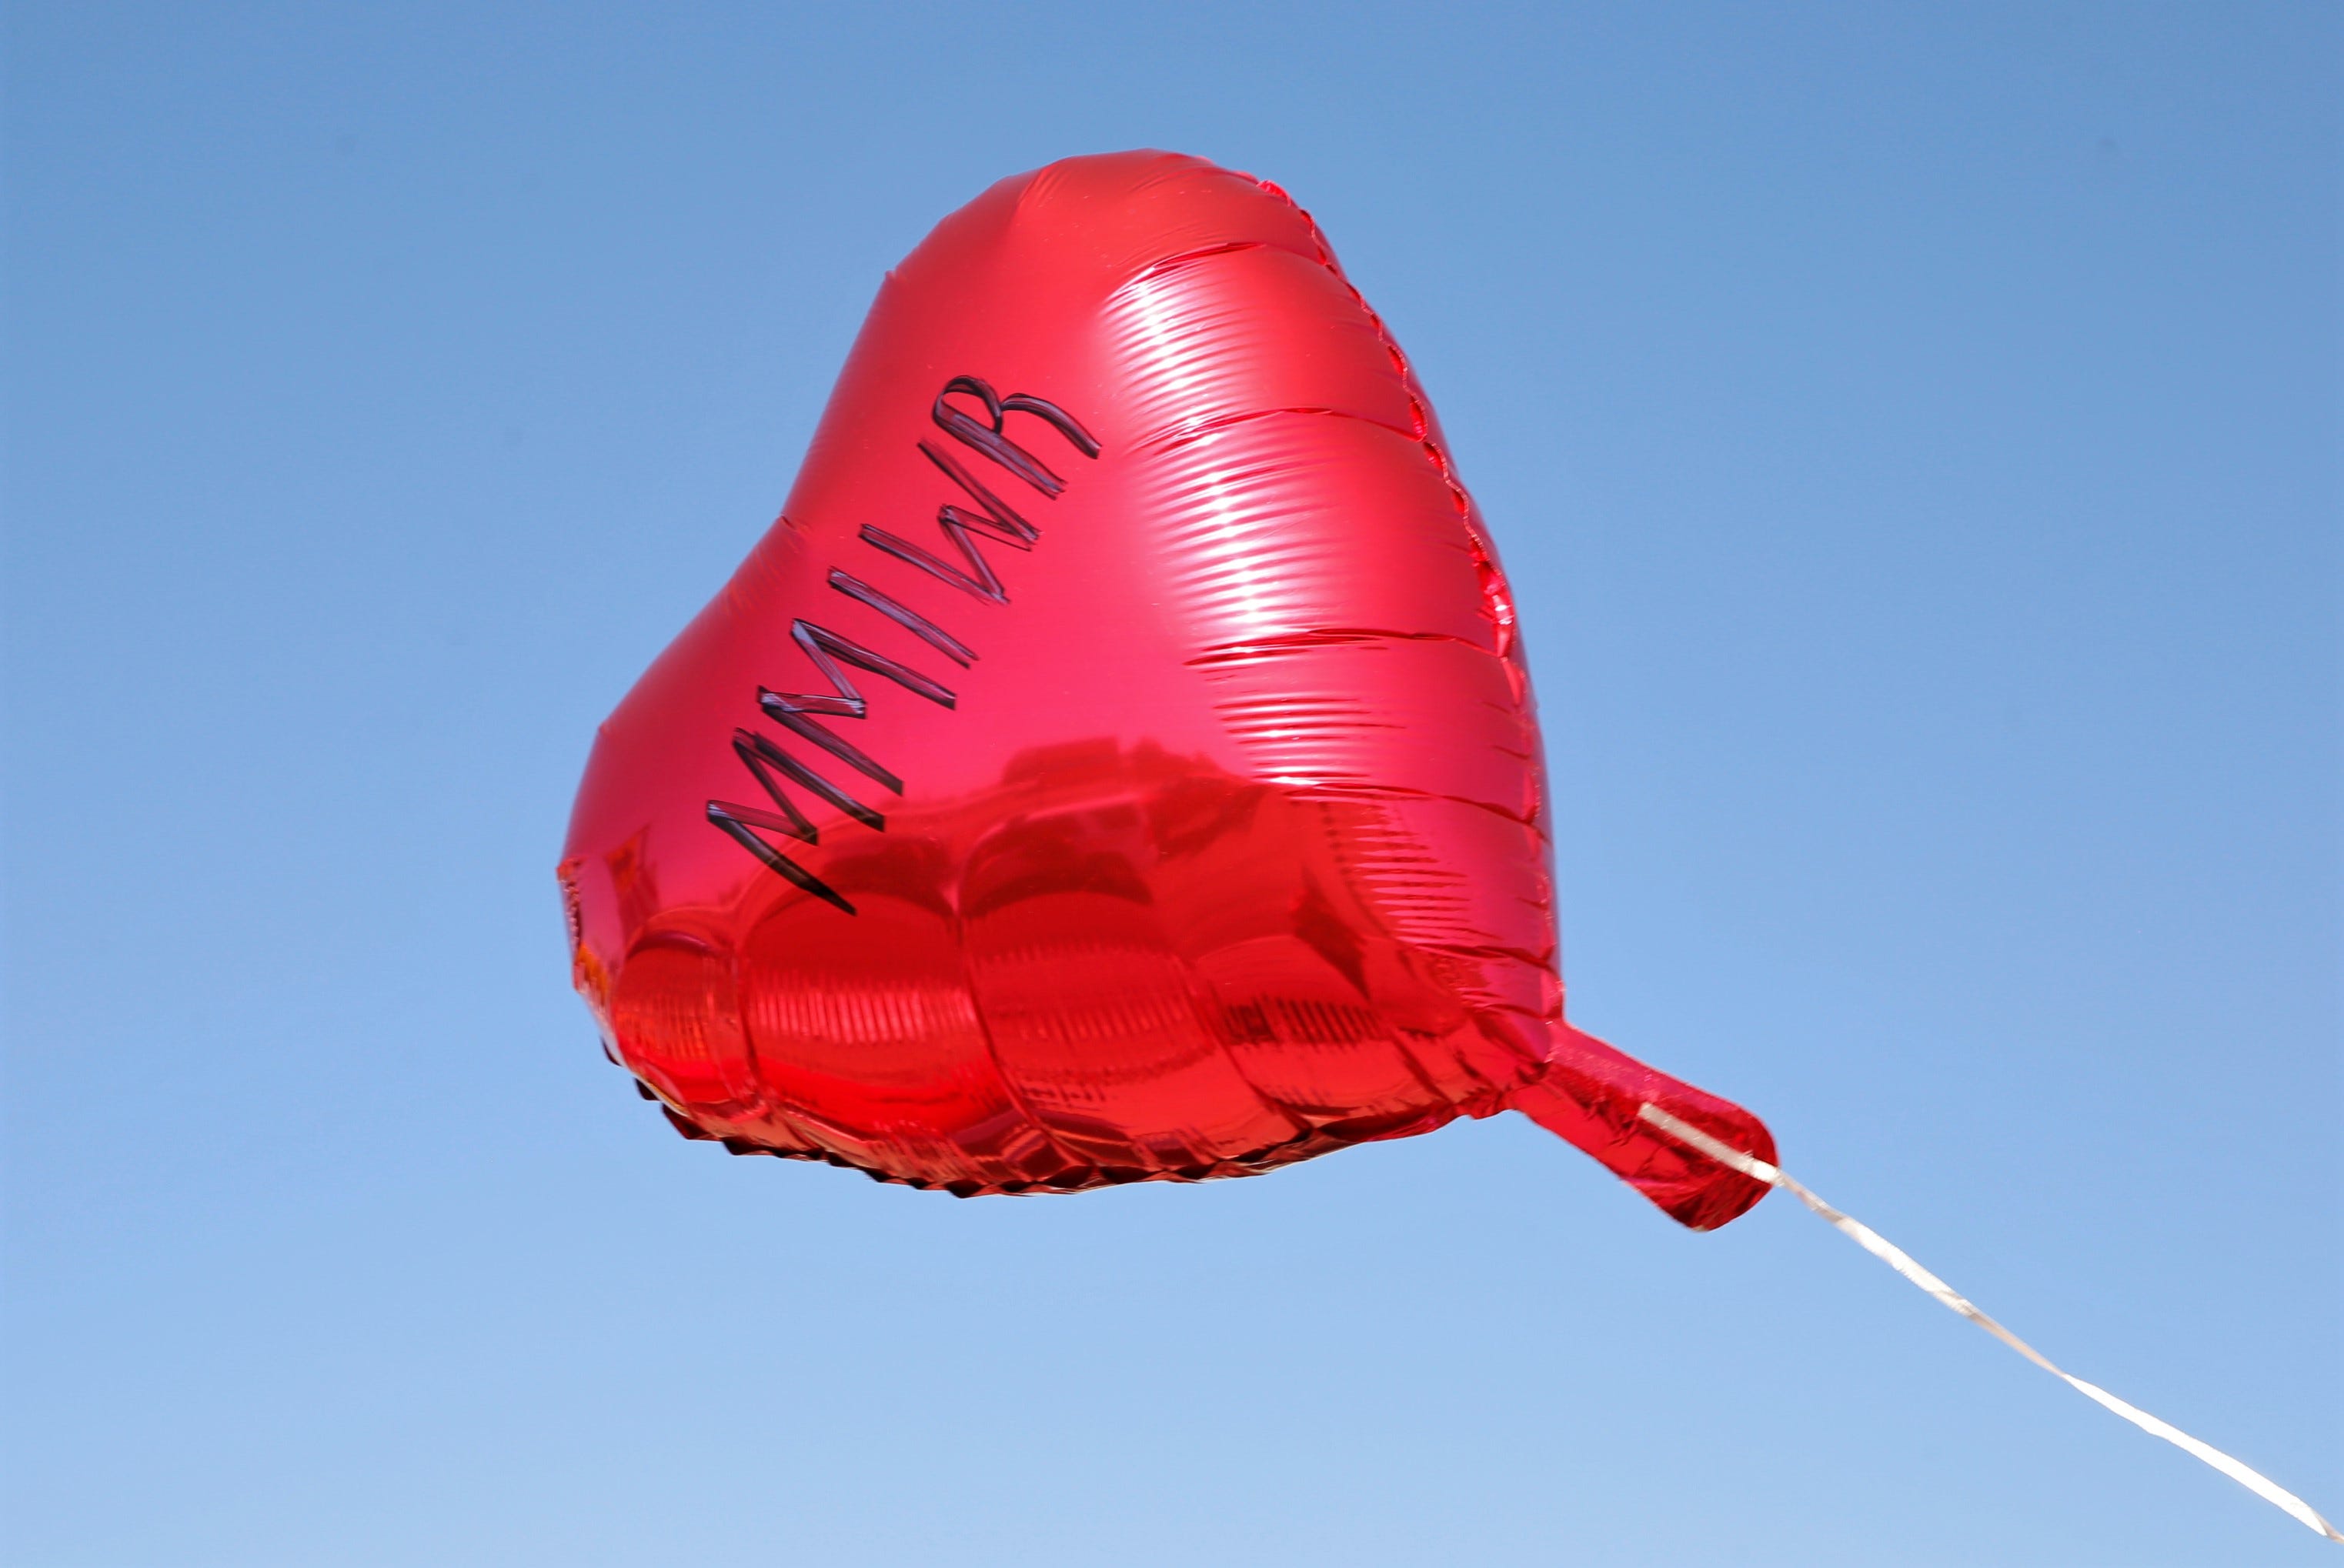 The acronym for Missing and Murdered Indigenous Women and Relatives flies on a balloon during the MMIW Memorial Honor Walk on May 5 in Shiprock.